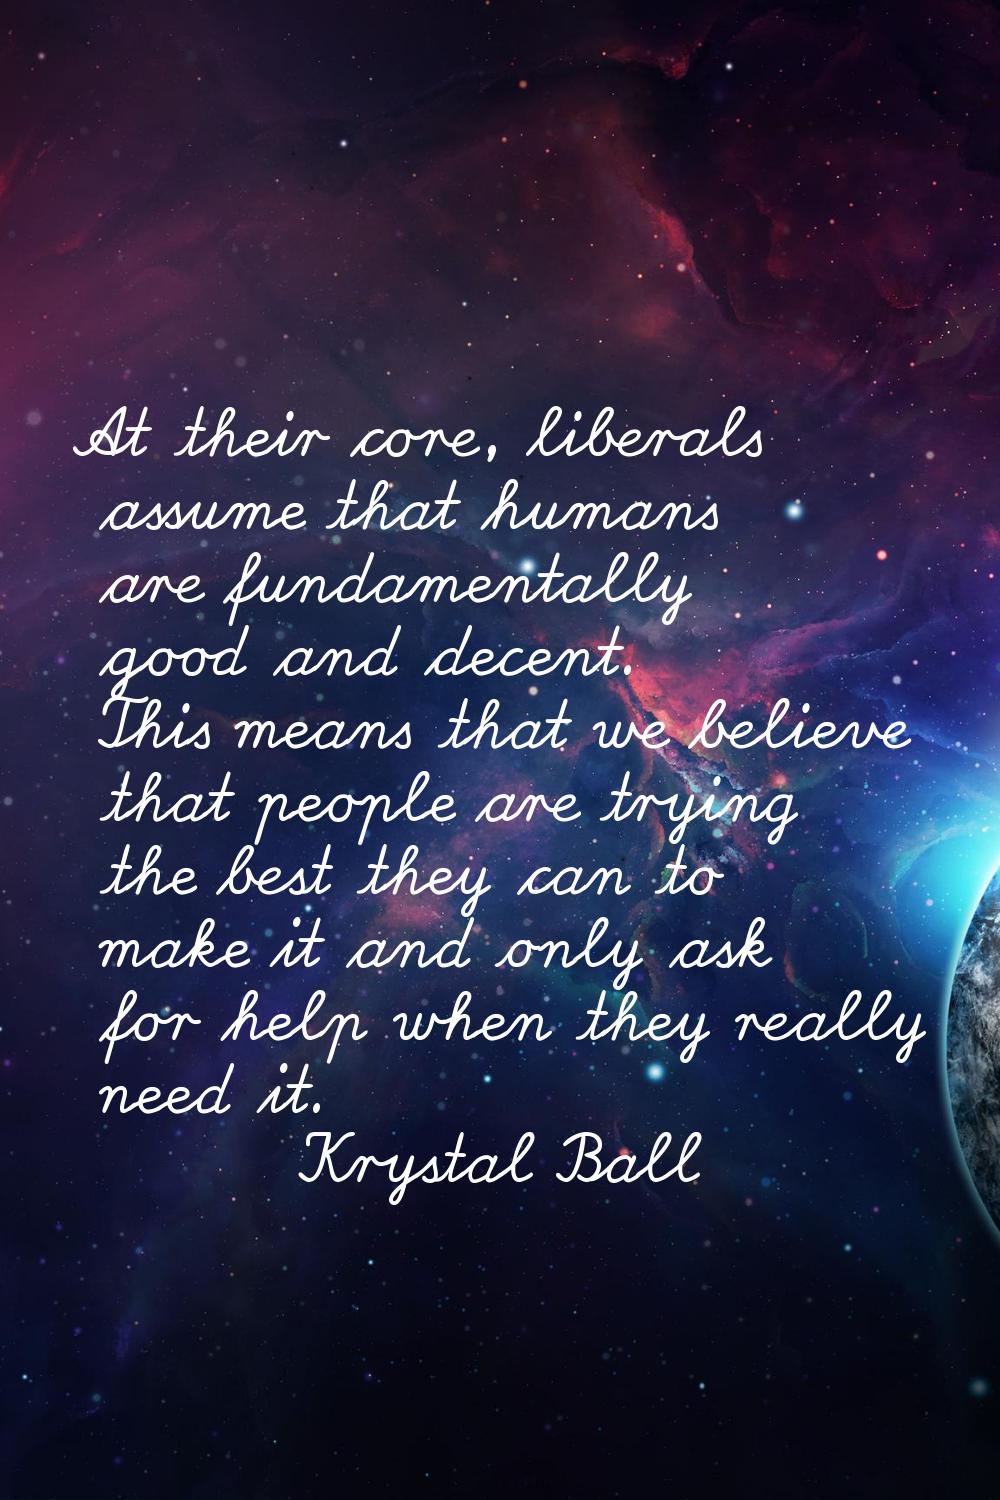 At their core, liberals assume that humans are fundamentally good and decent. This means that we be